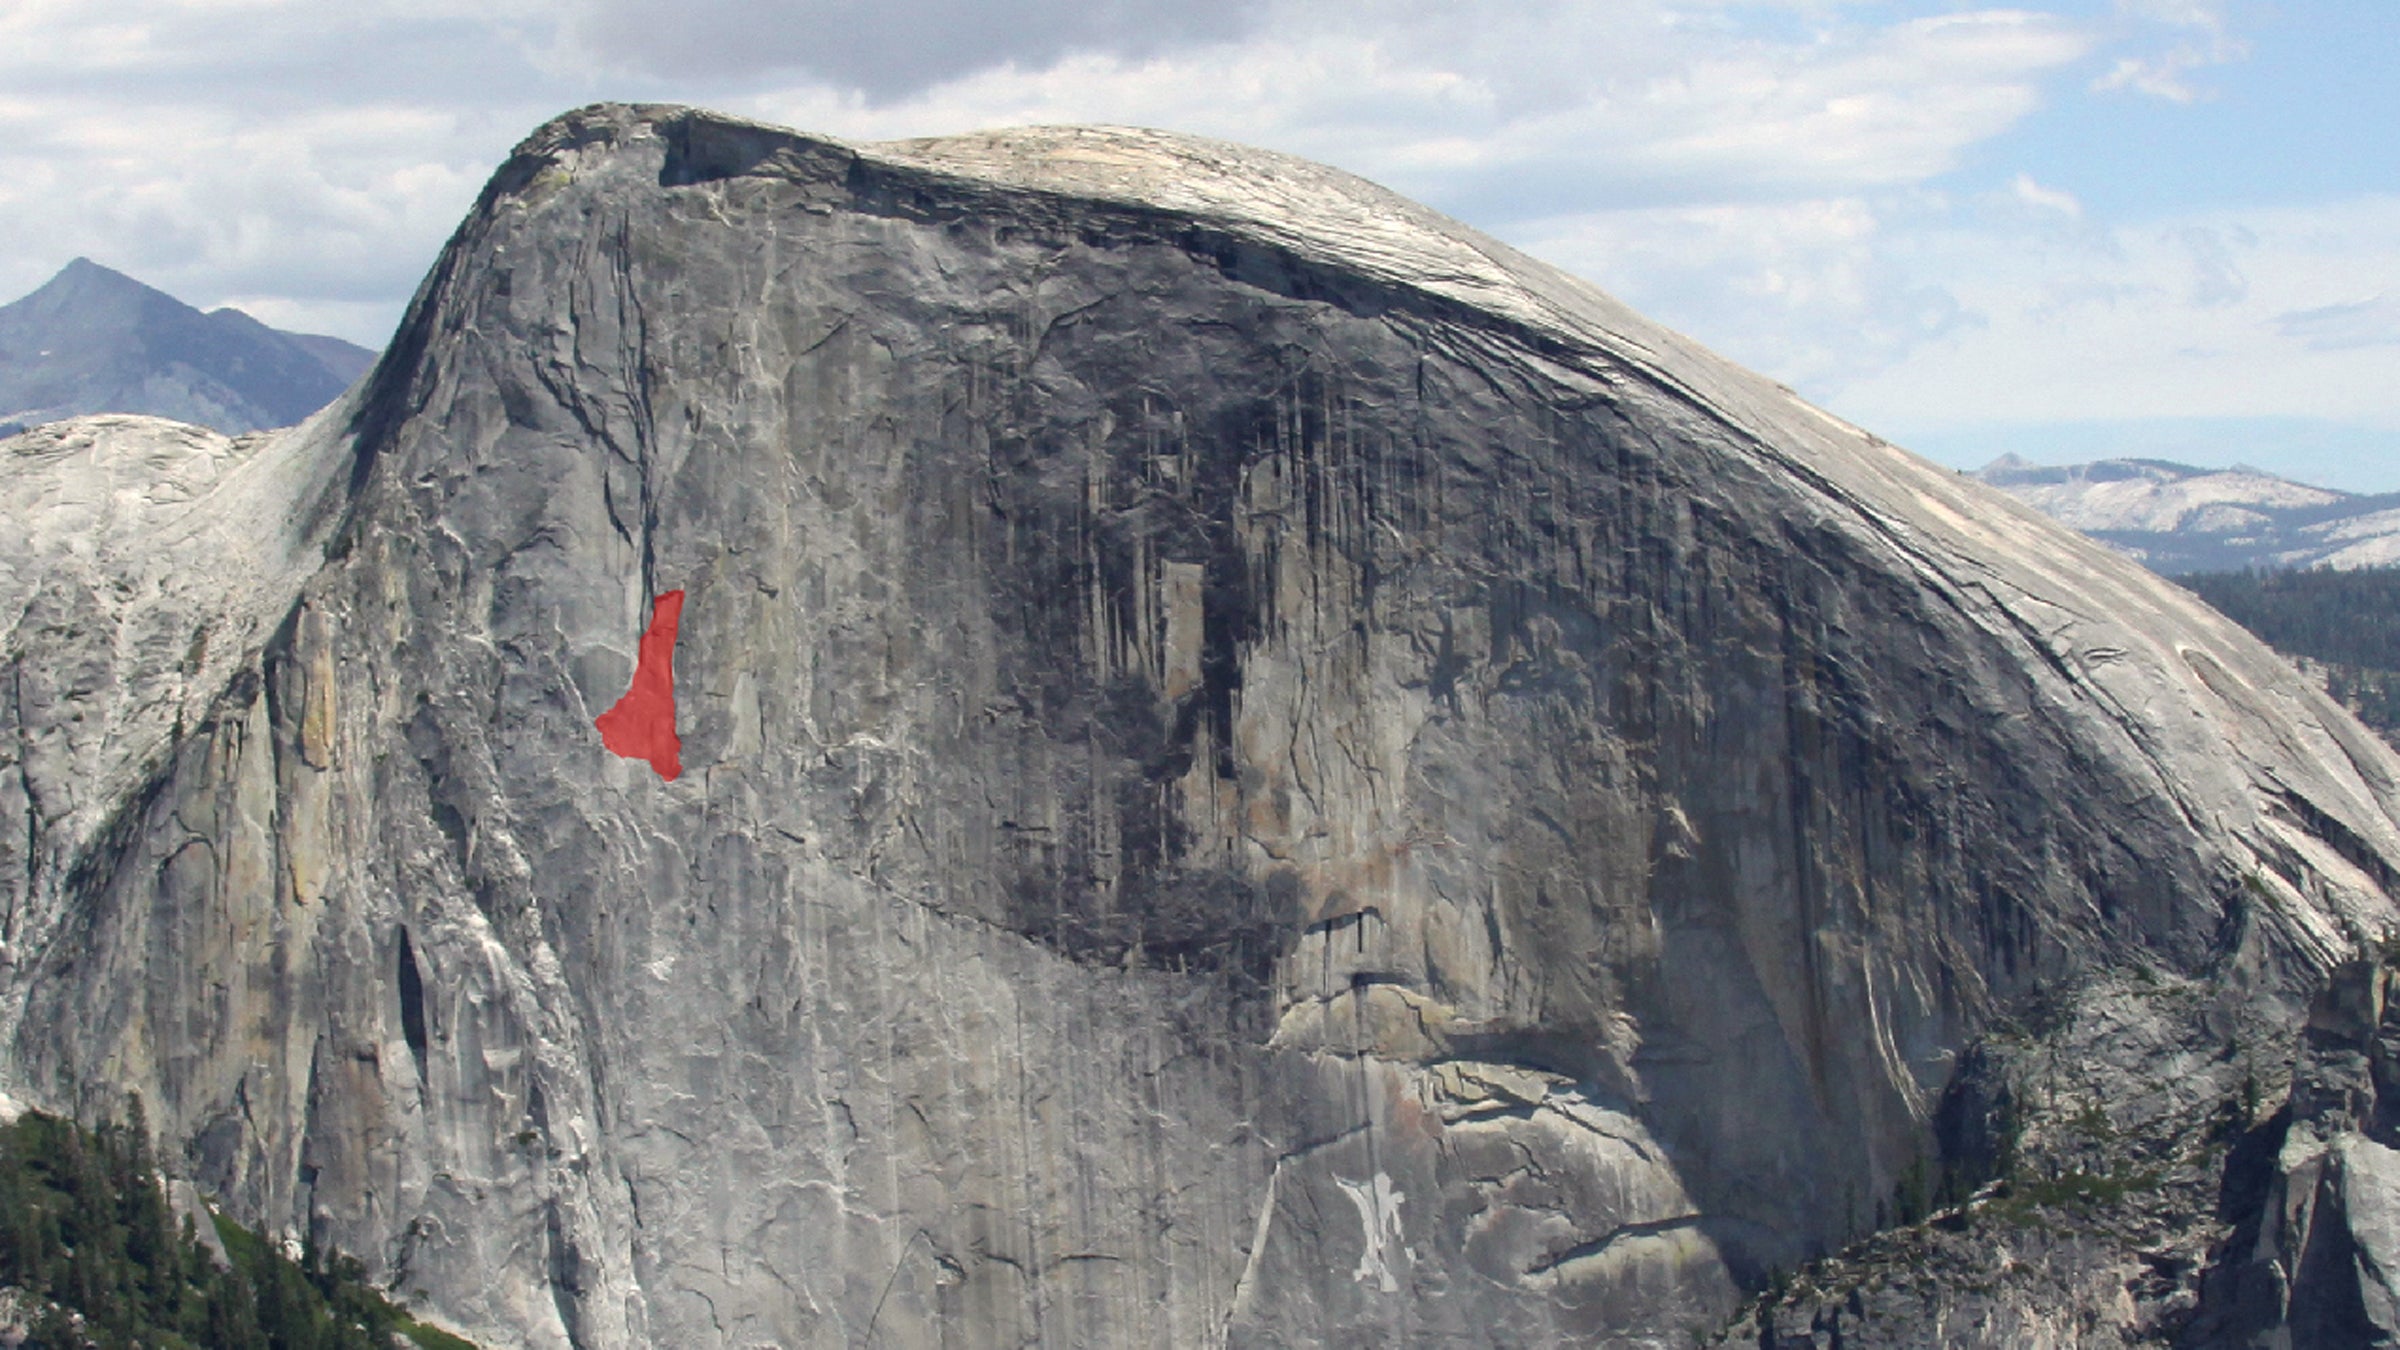 5 Things Climbers Need to Know About the Half Dome Flake that Broke Loose